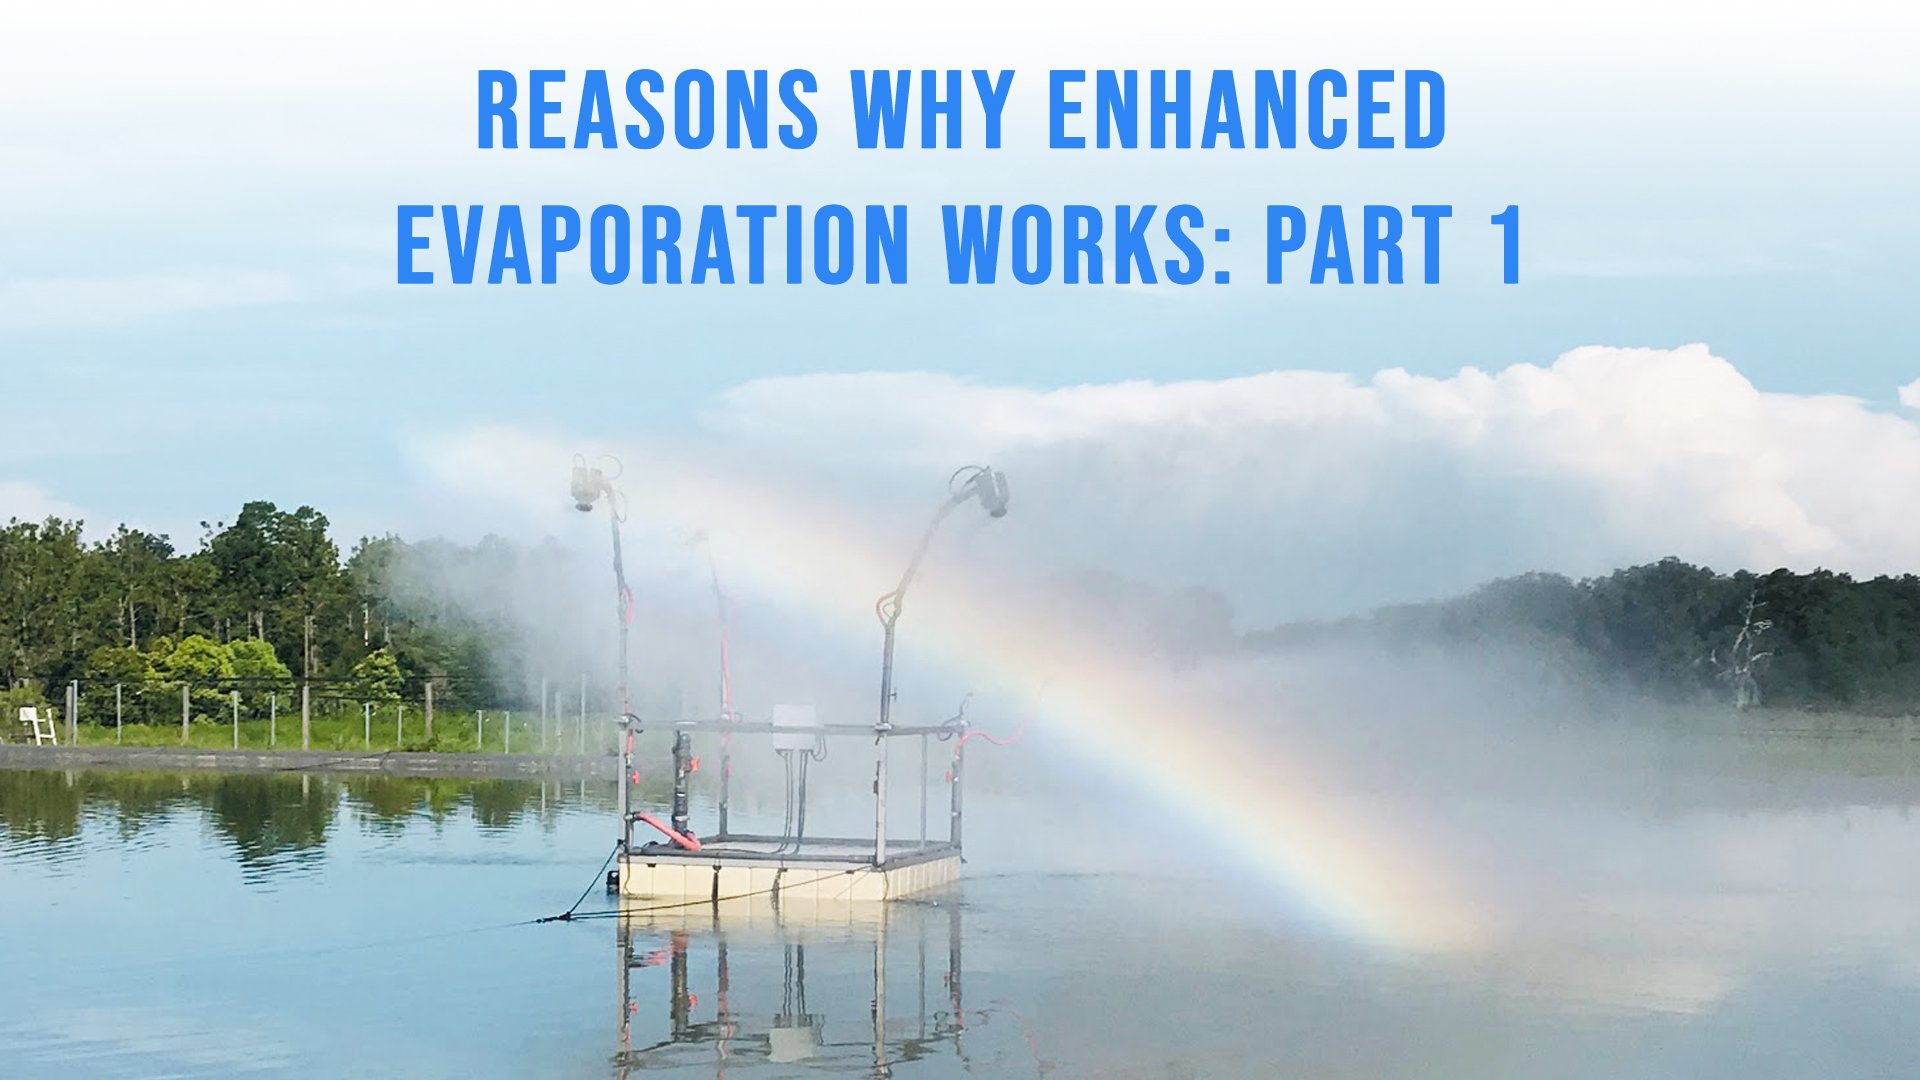 Reasons Why Enhanced Evaporation Works: Part 1